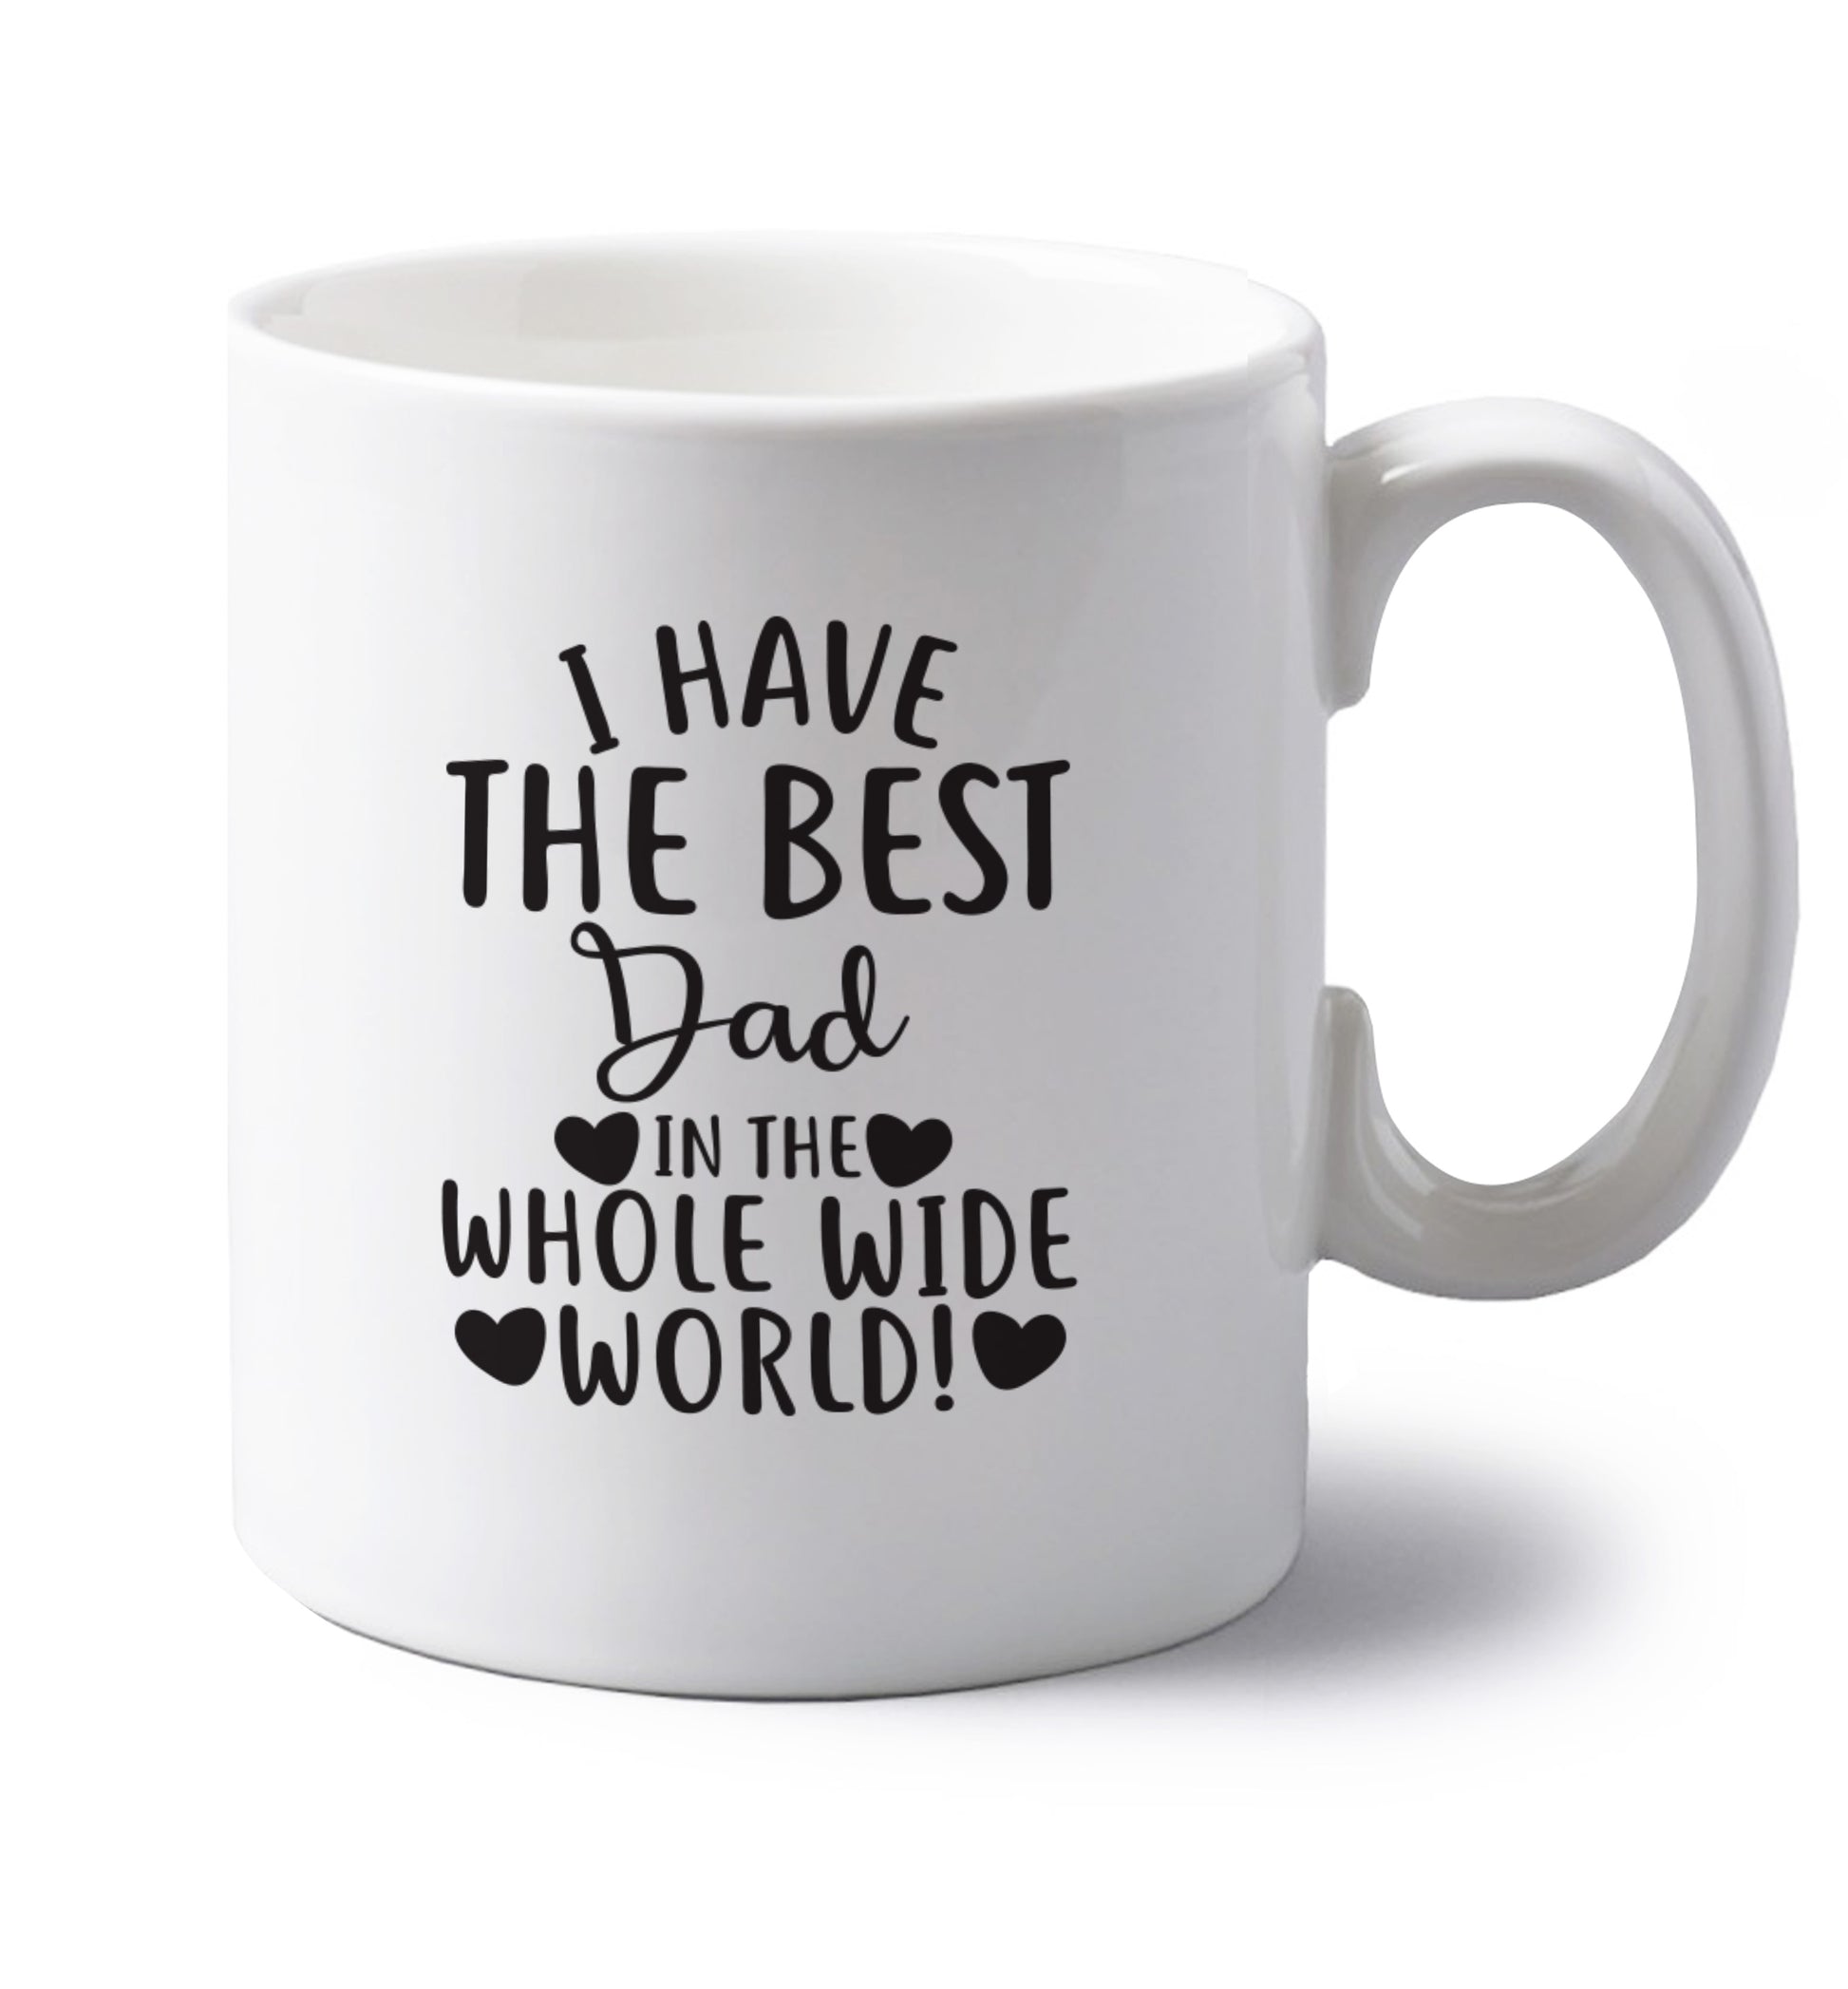 I have the best dad in the whole wide world! left handed white ceramic mug 